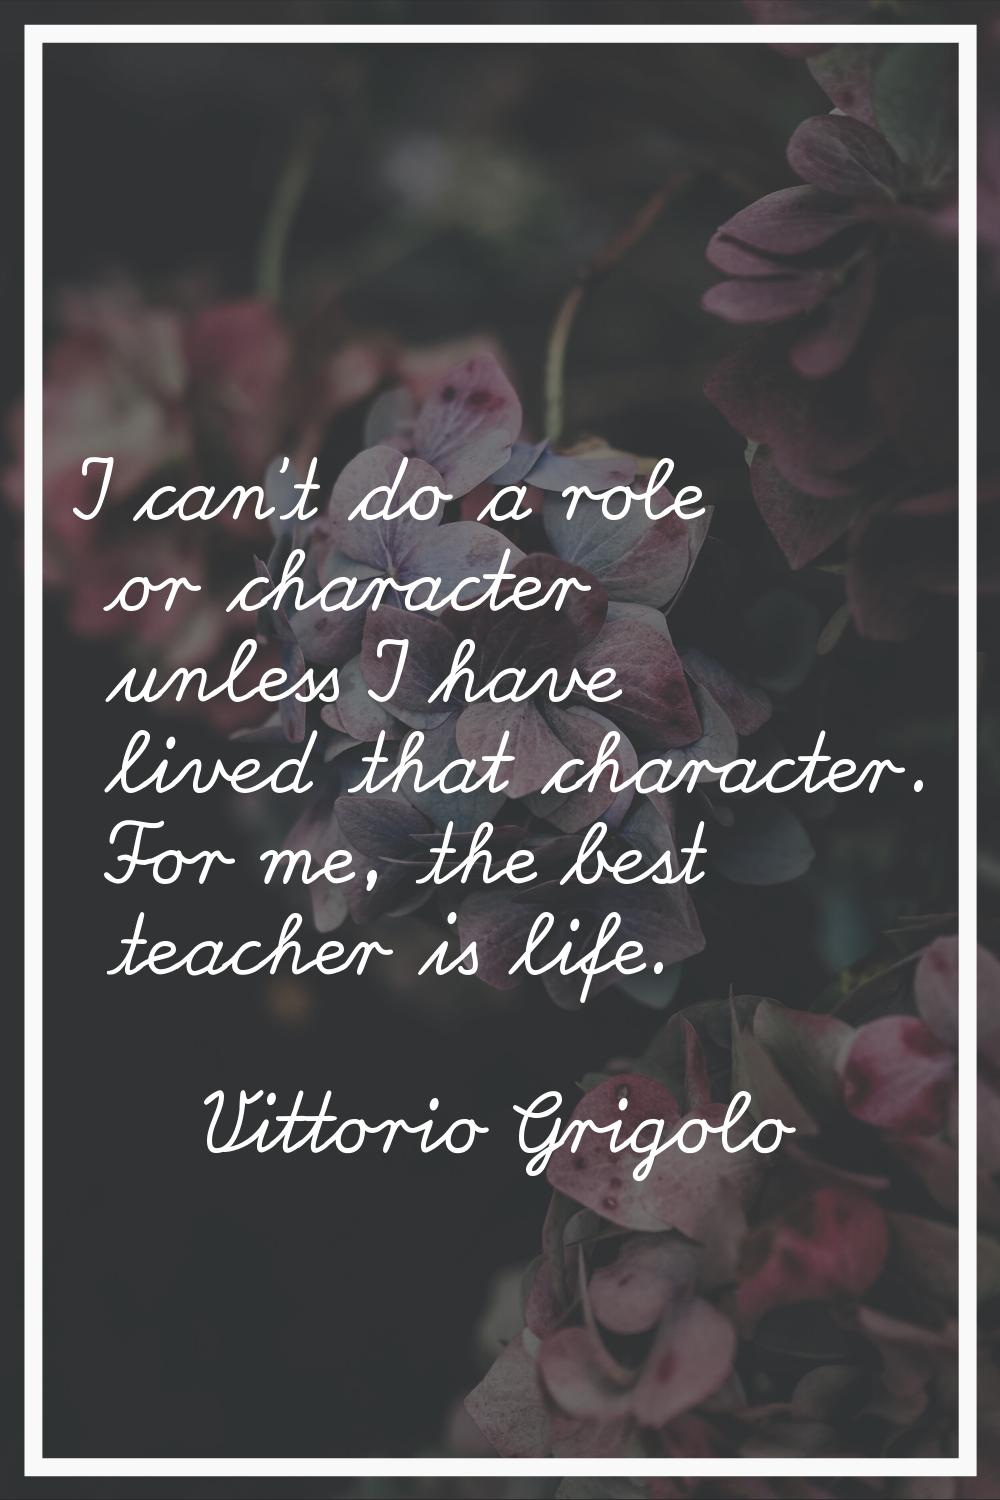 I can't do a role or character unless I have lived that character. For me, the best teacher is life